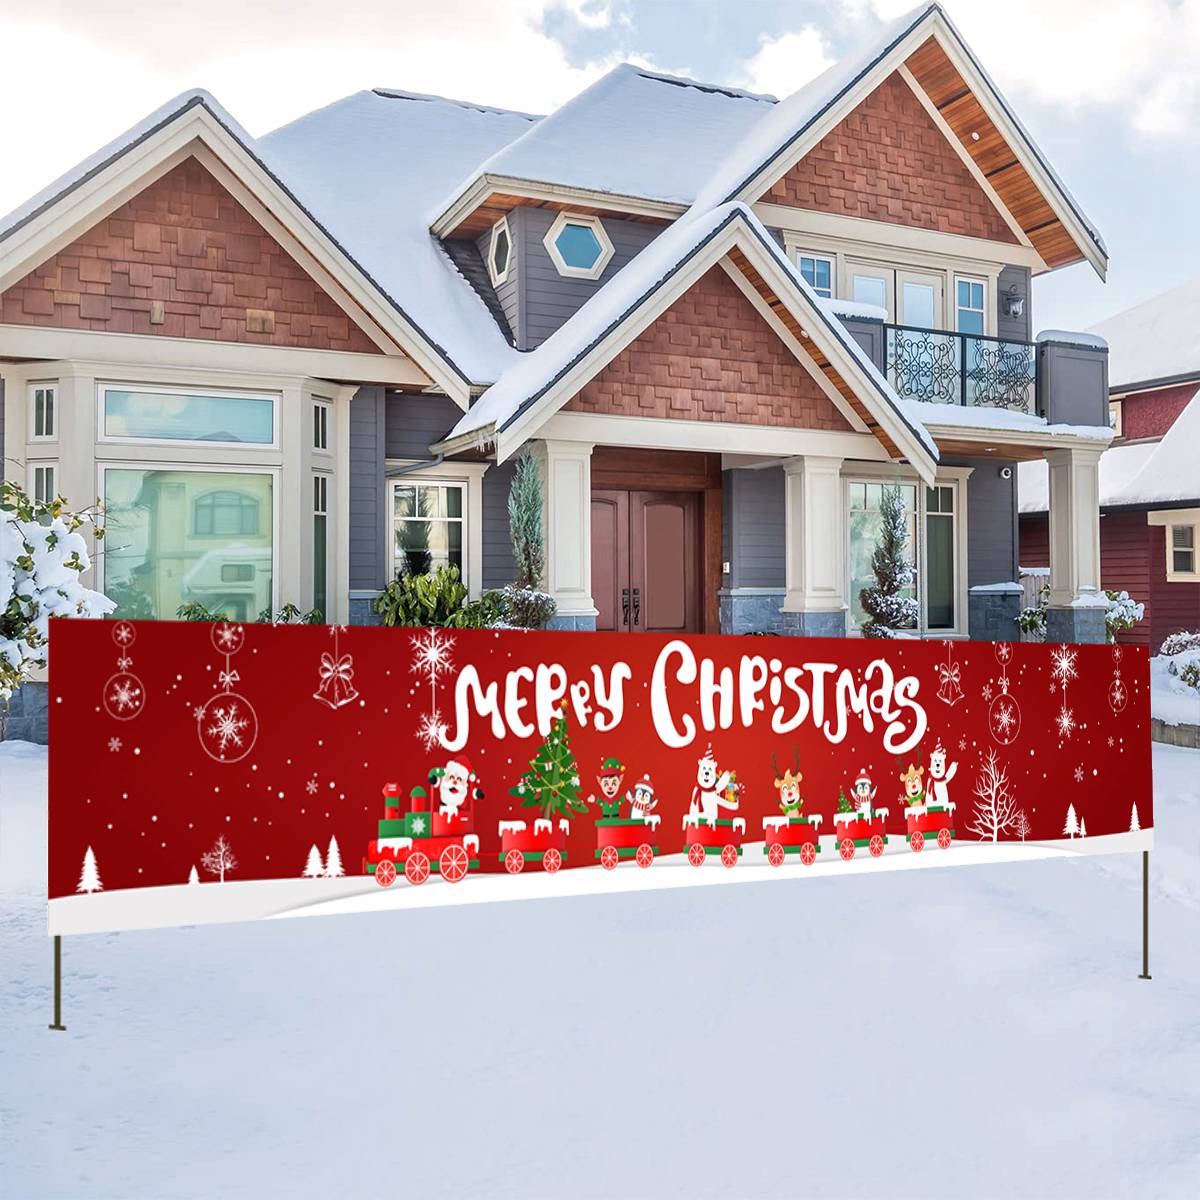 Merry Christmas New Year Banners Decorations